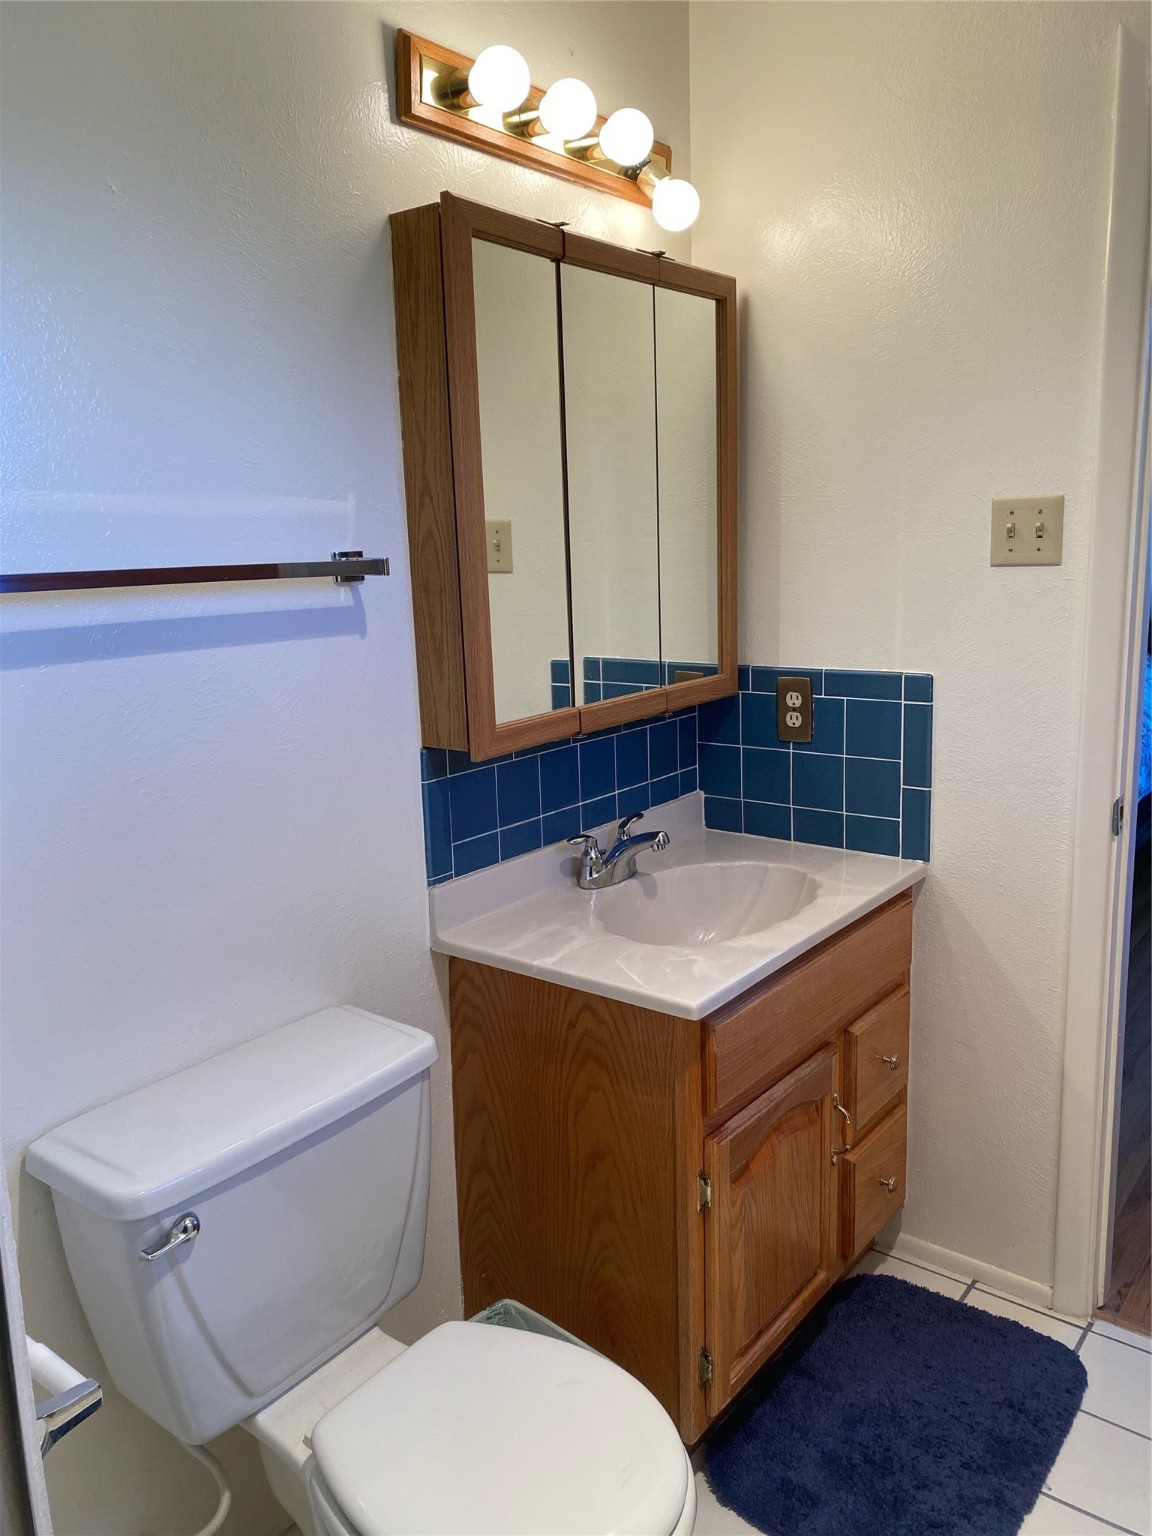 416 W San Mateo Road, Santa Fe, New Mexico 87505, 4 Bedrooms Bedrooms, ,2 BathroomsBathrooms,Residential,For Sale,416 W San Mateo Road,202234013